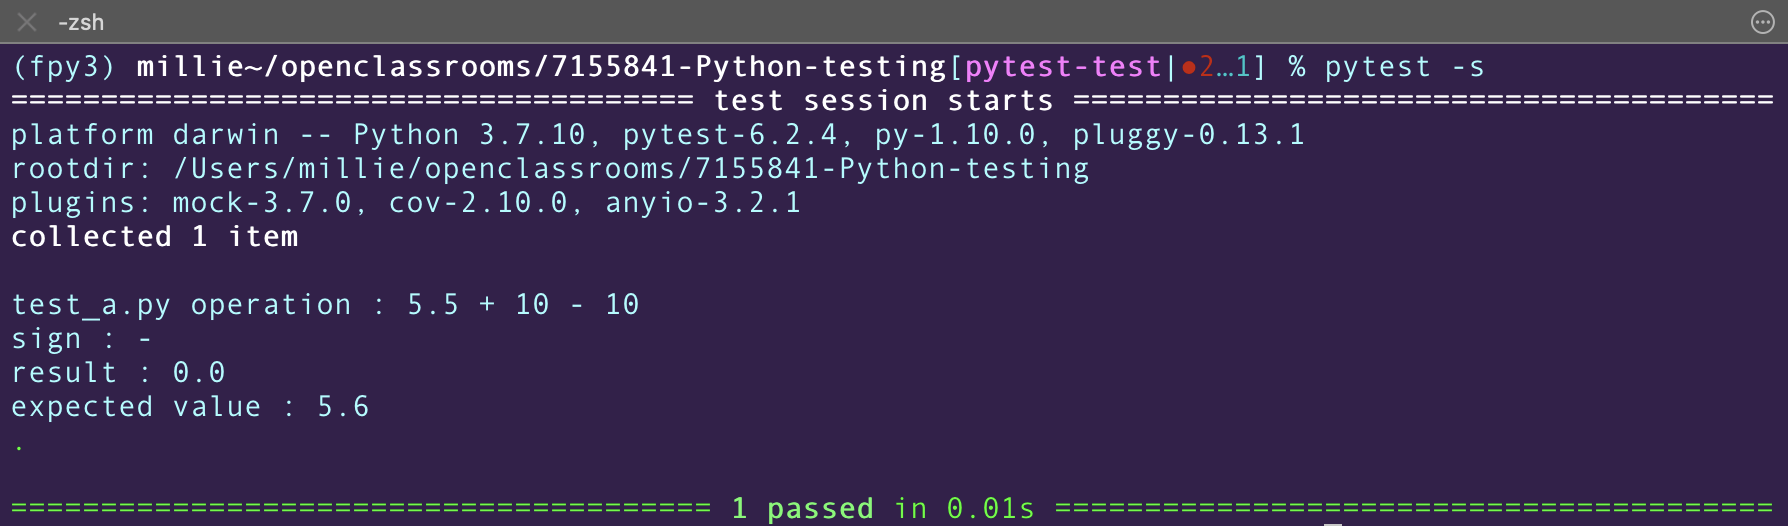 Use the pytest command with the -s option to see the print results.